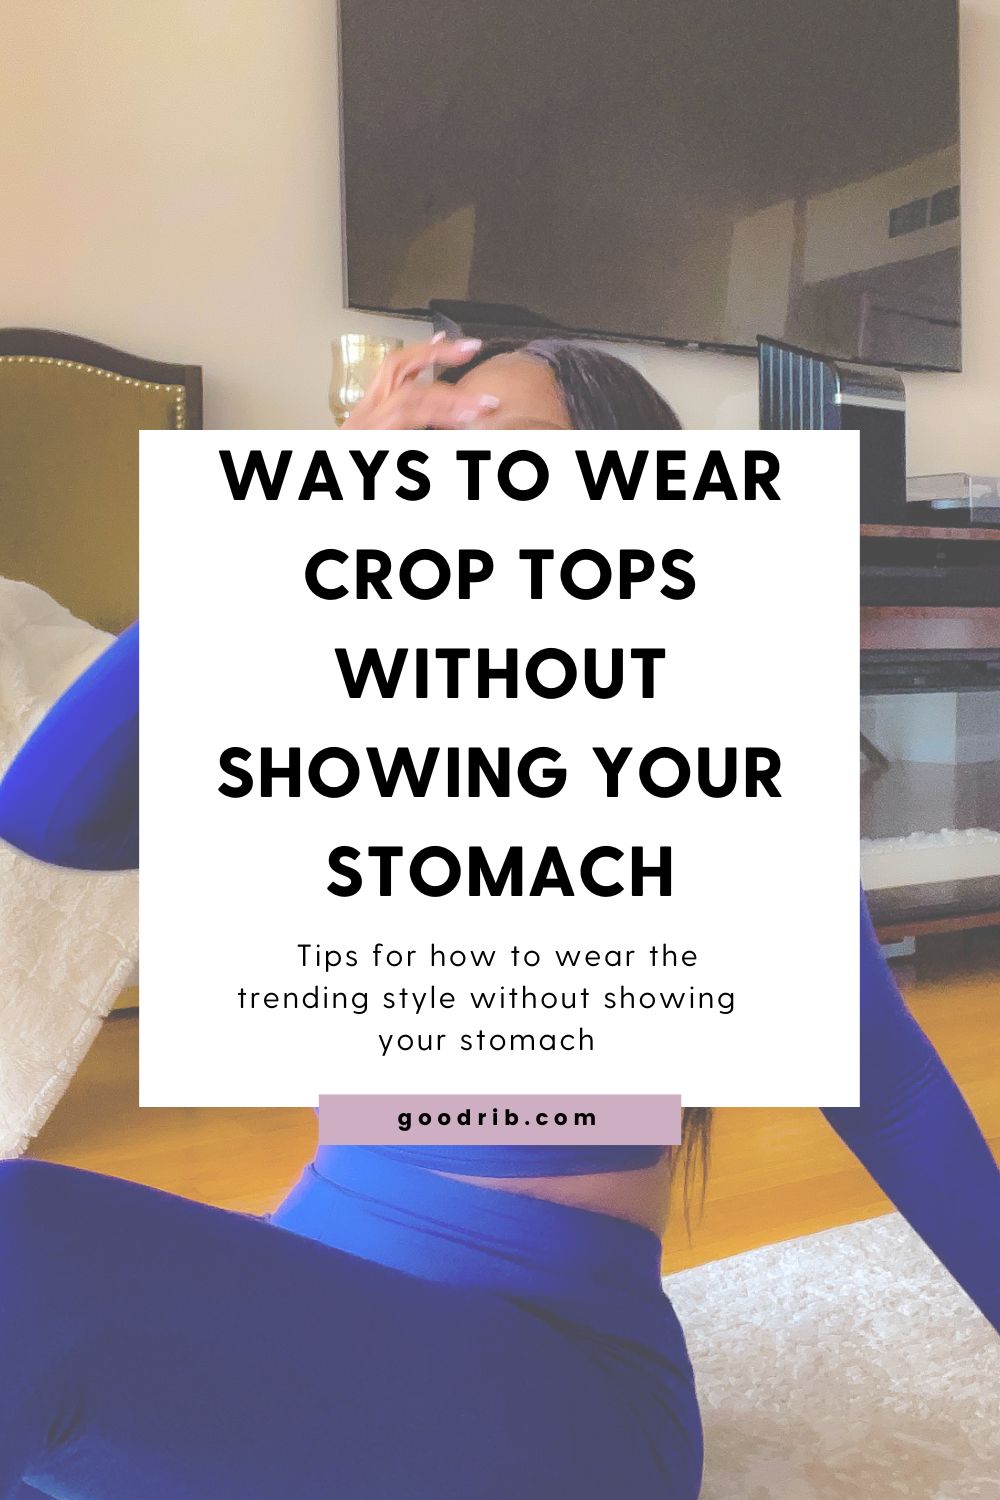 Ways to Wear Crop Tops Without Showing Your Stomach